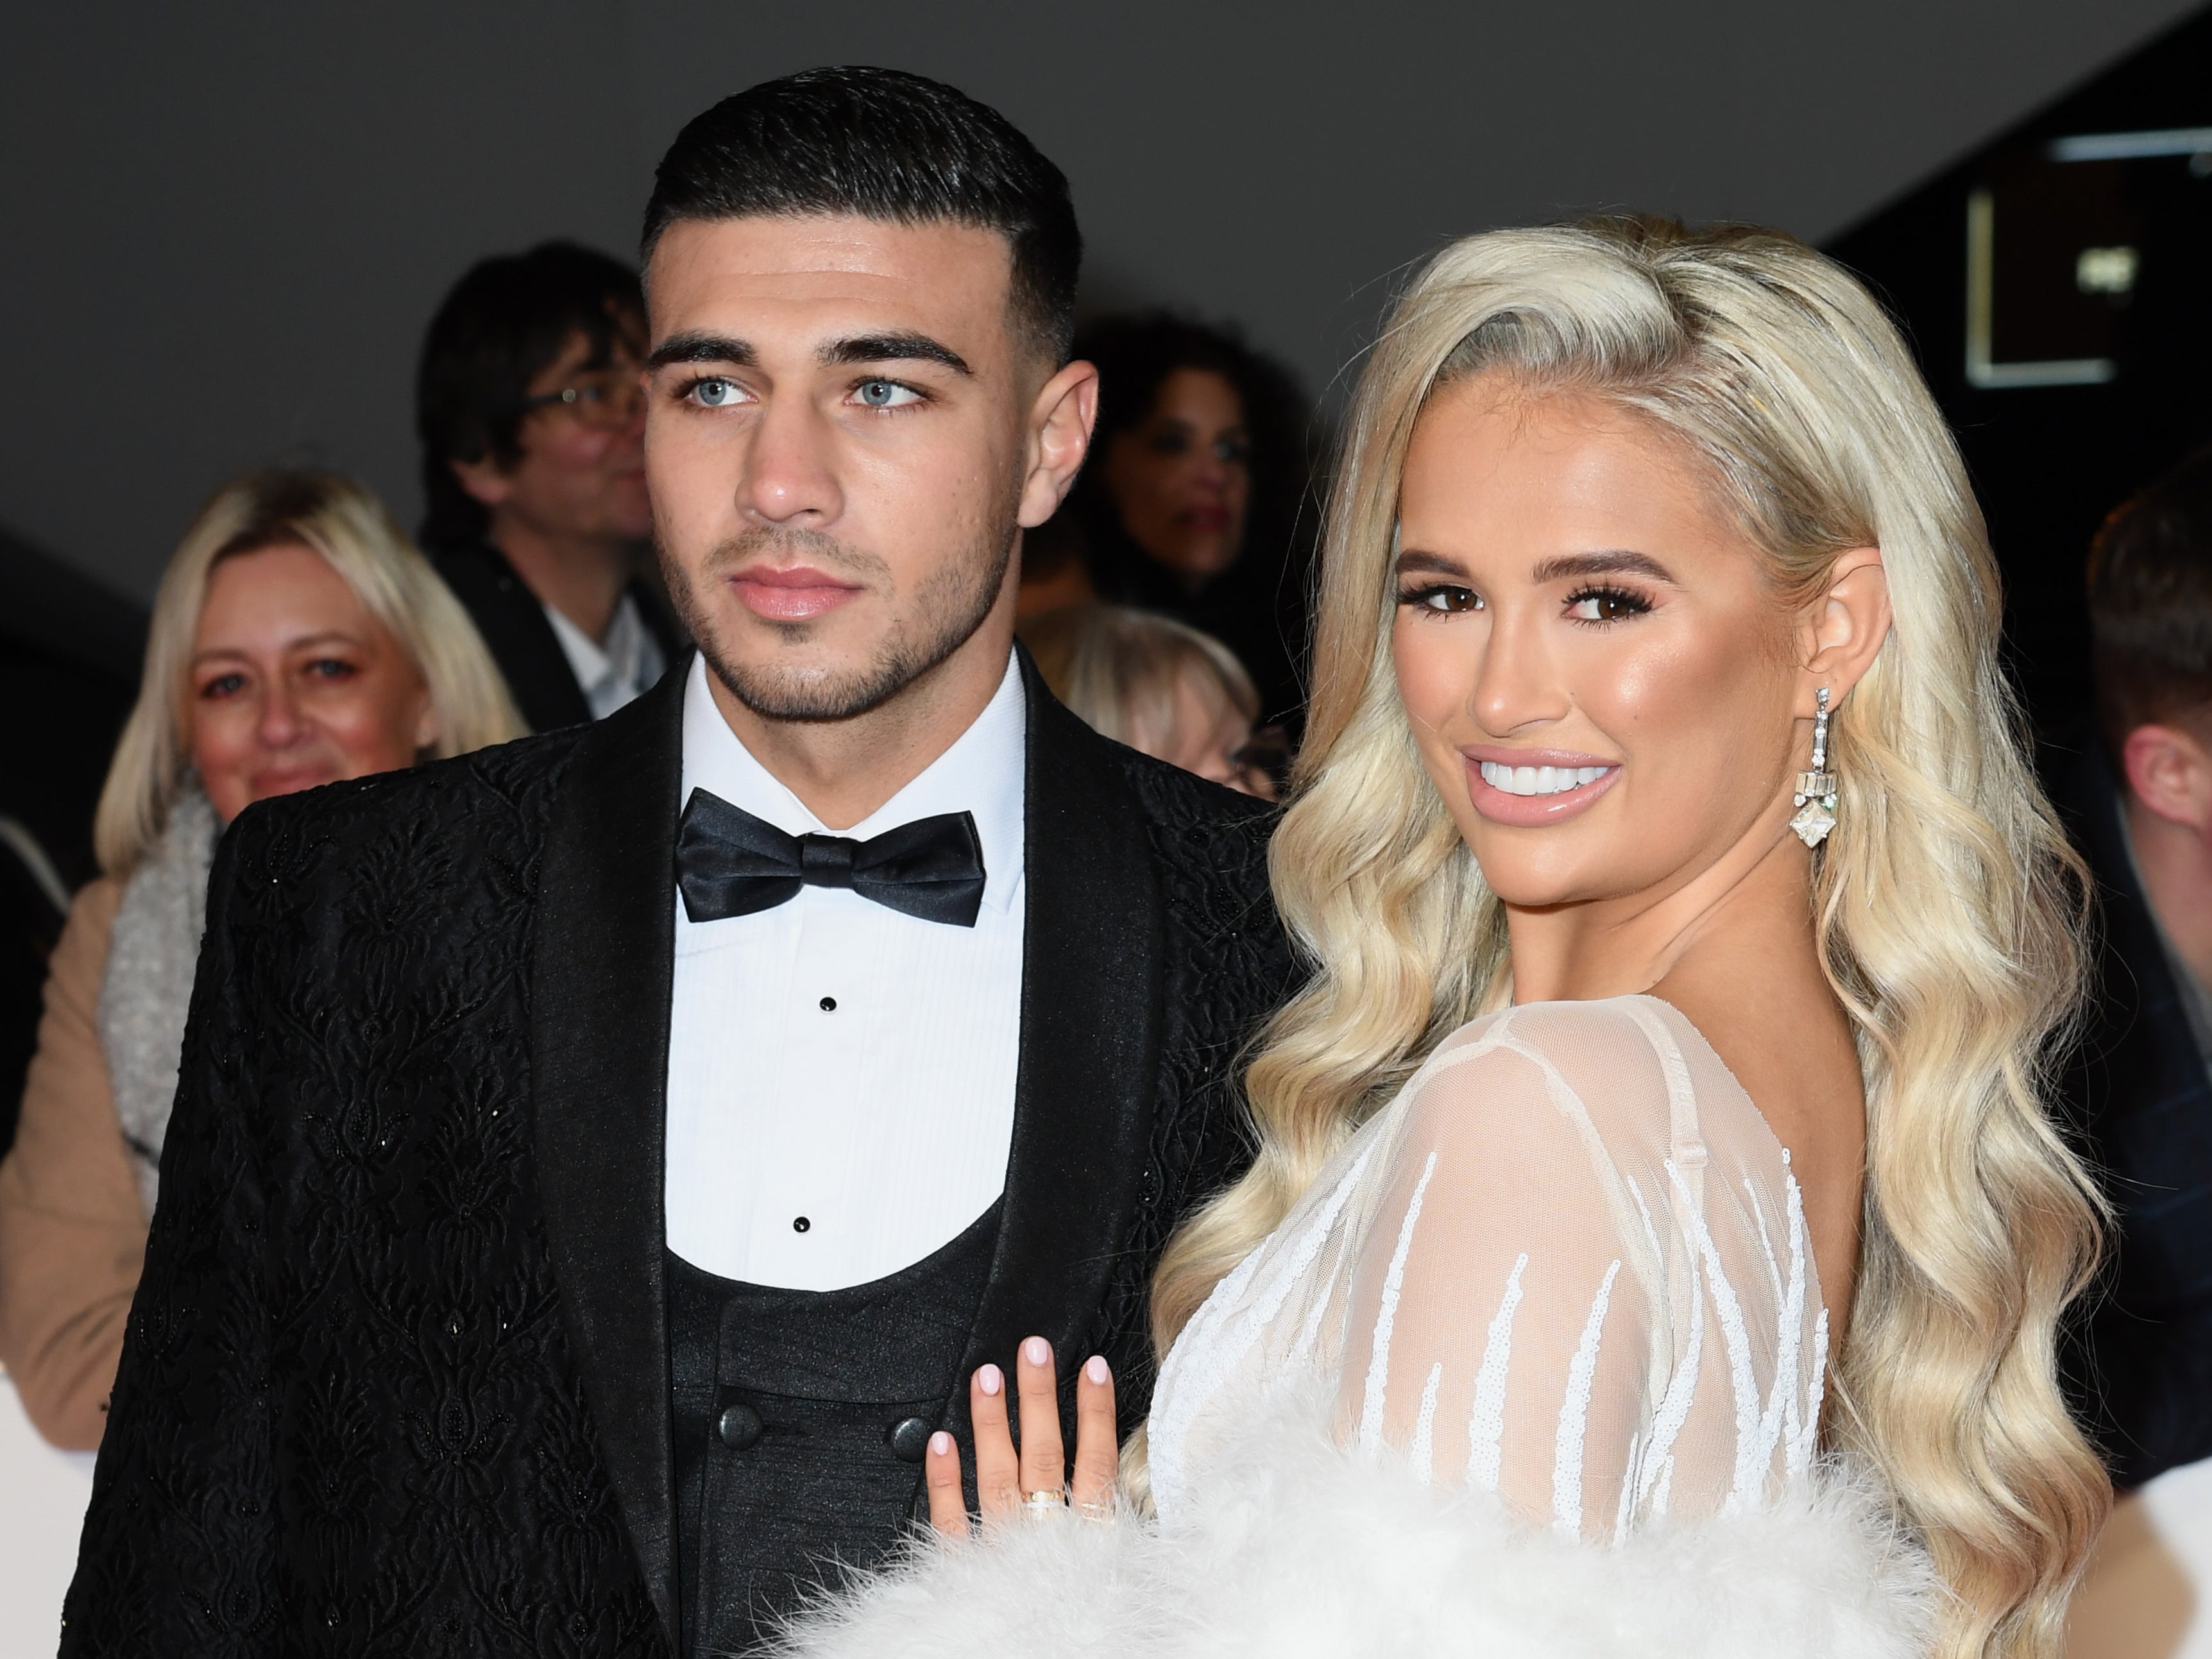 Molly-Mae Hague, often dubbed a ‘super-influencer’, and Tommy Fury, both of whom appeared on Love Island